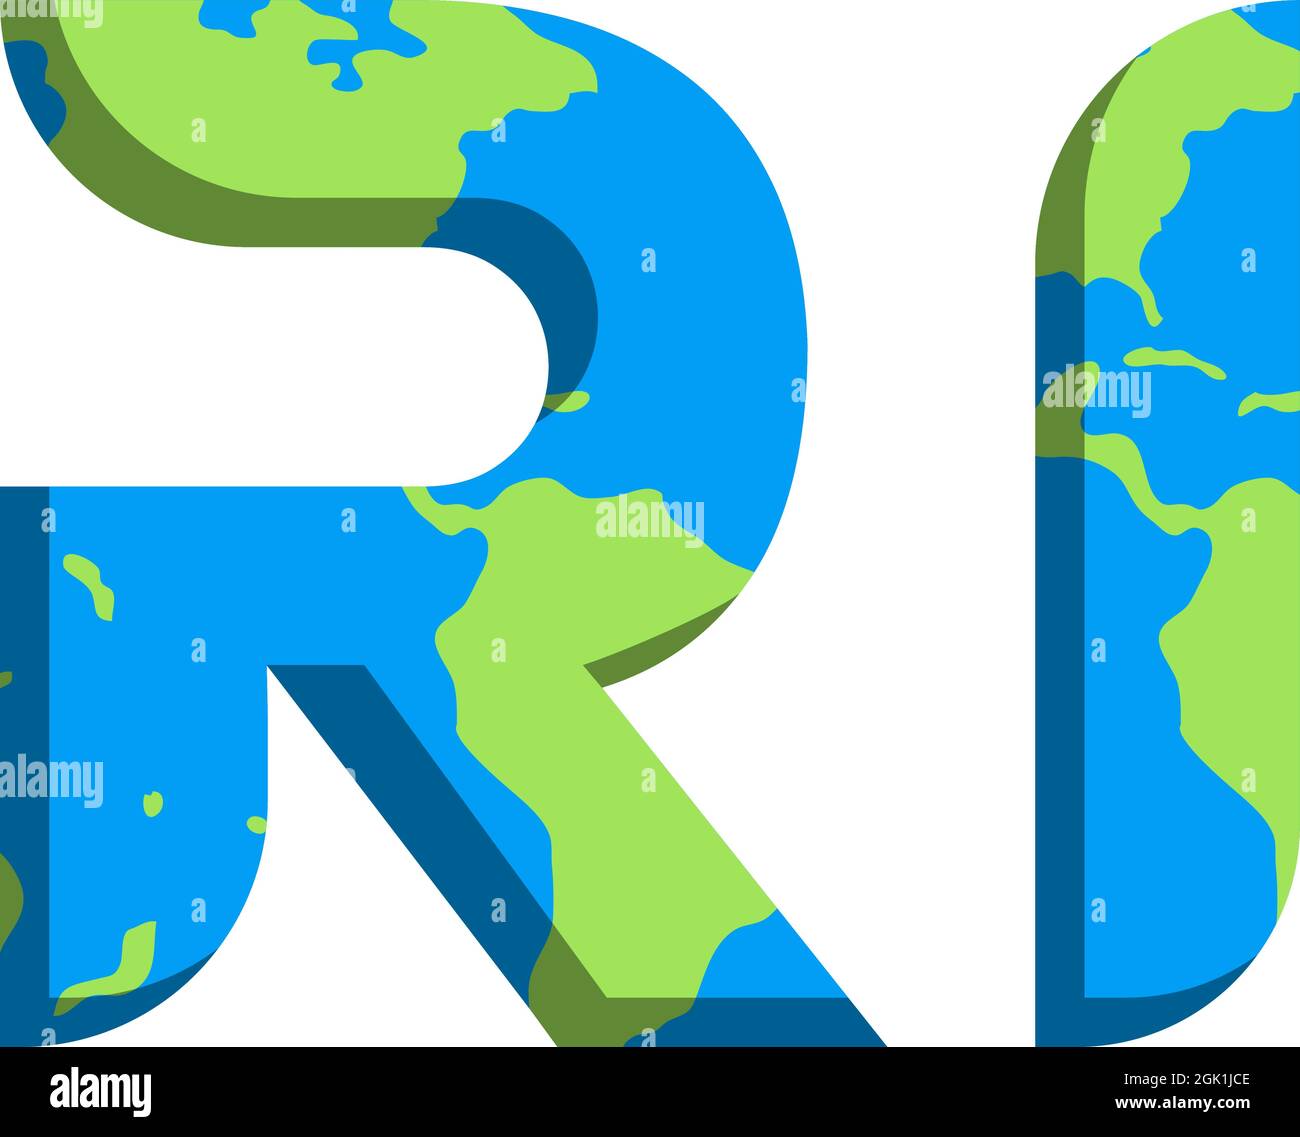 Initial RI logo design with World Map style, Logo business branding. Stock Vector